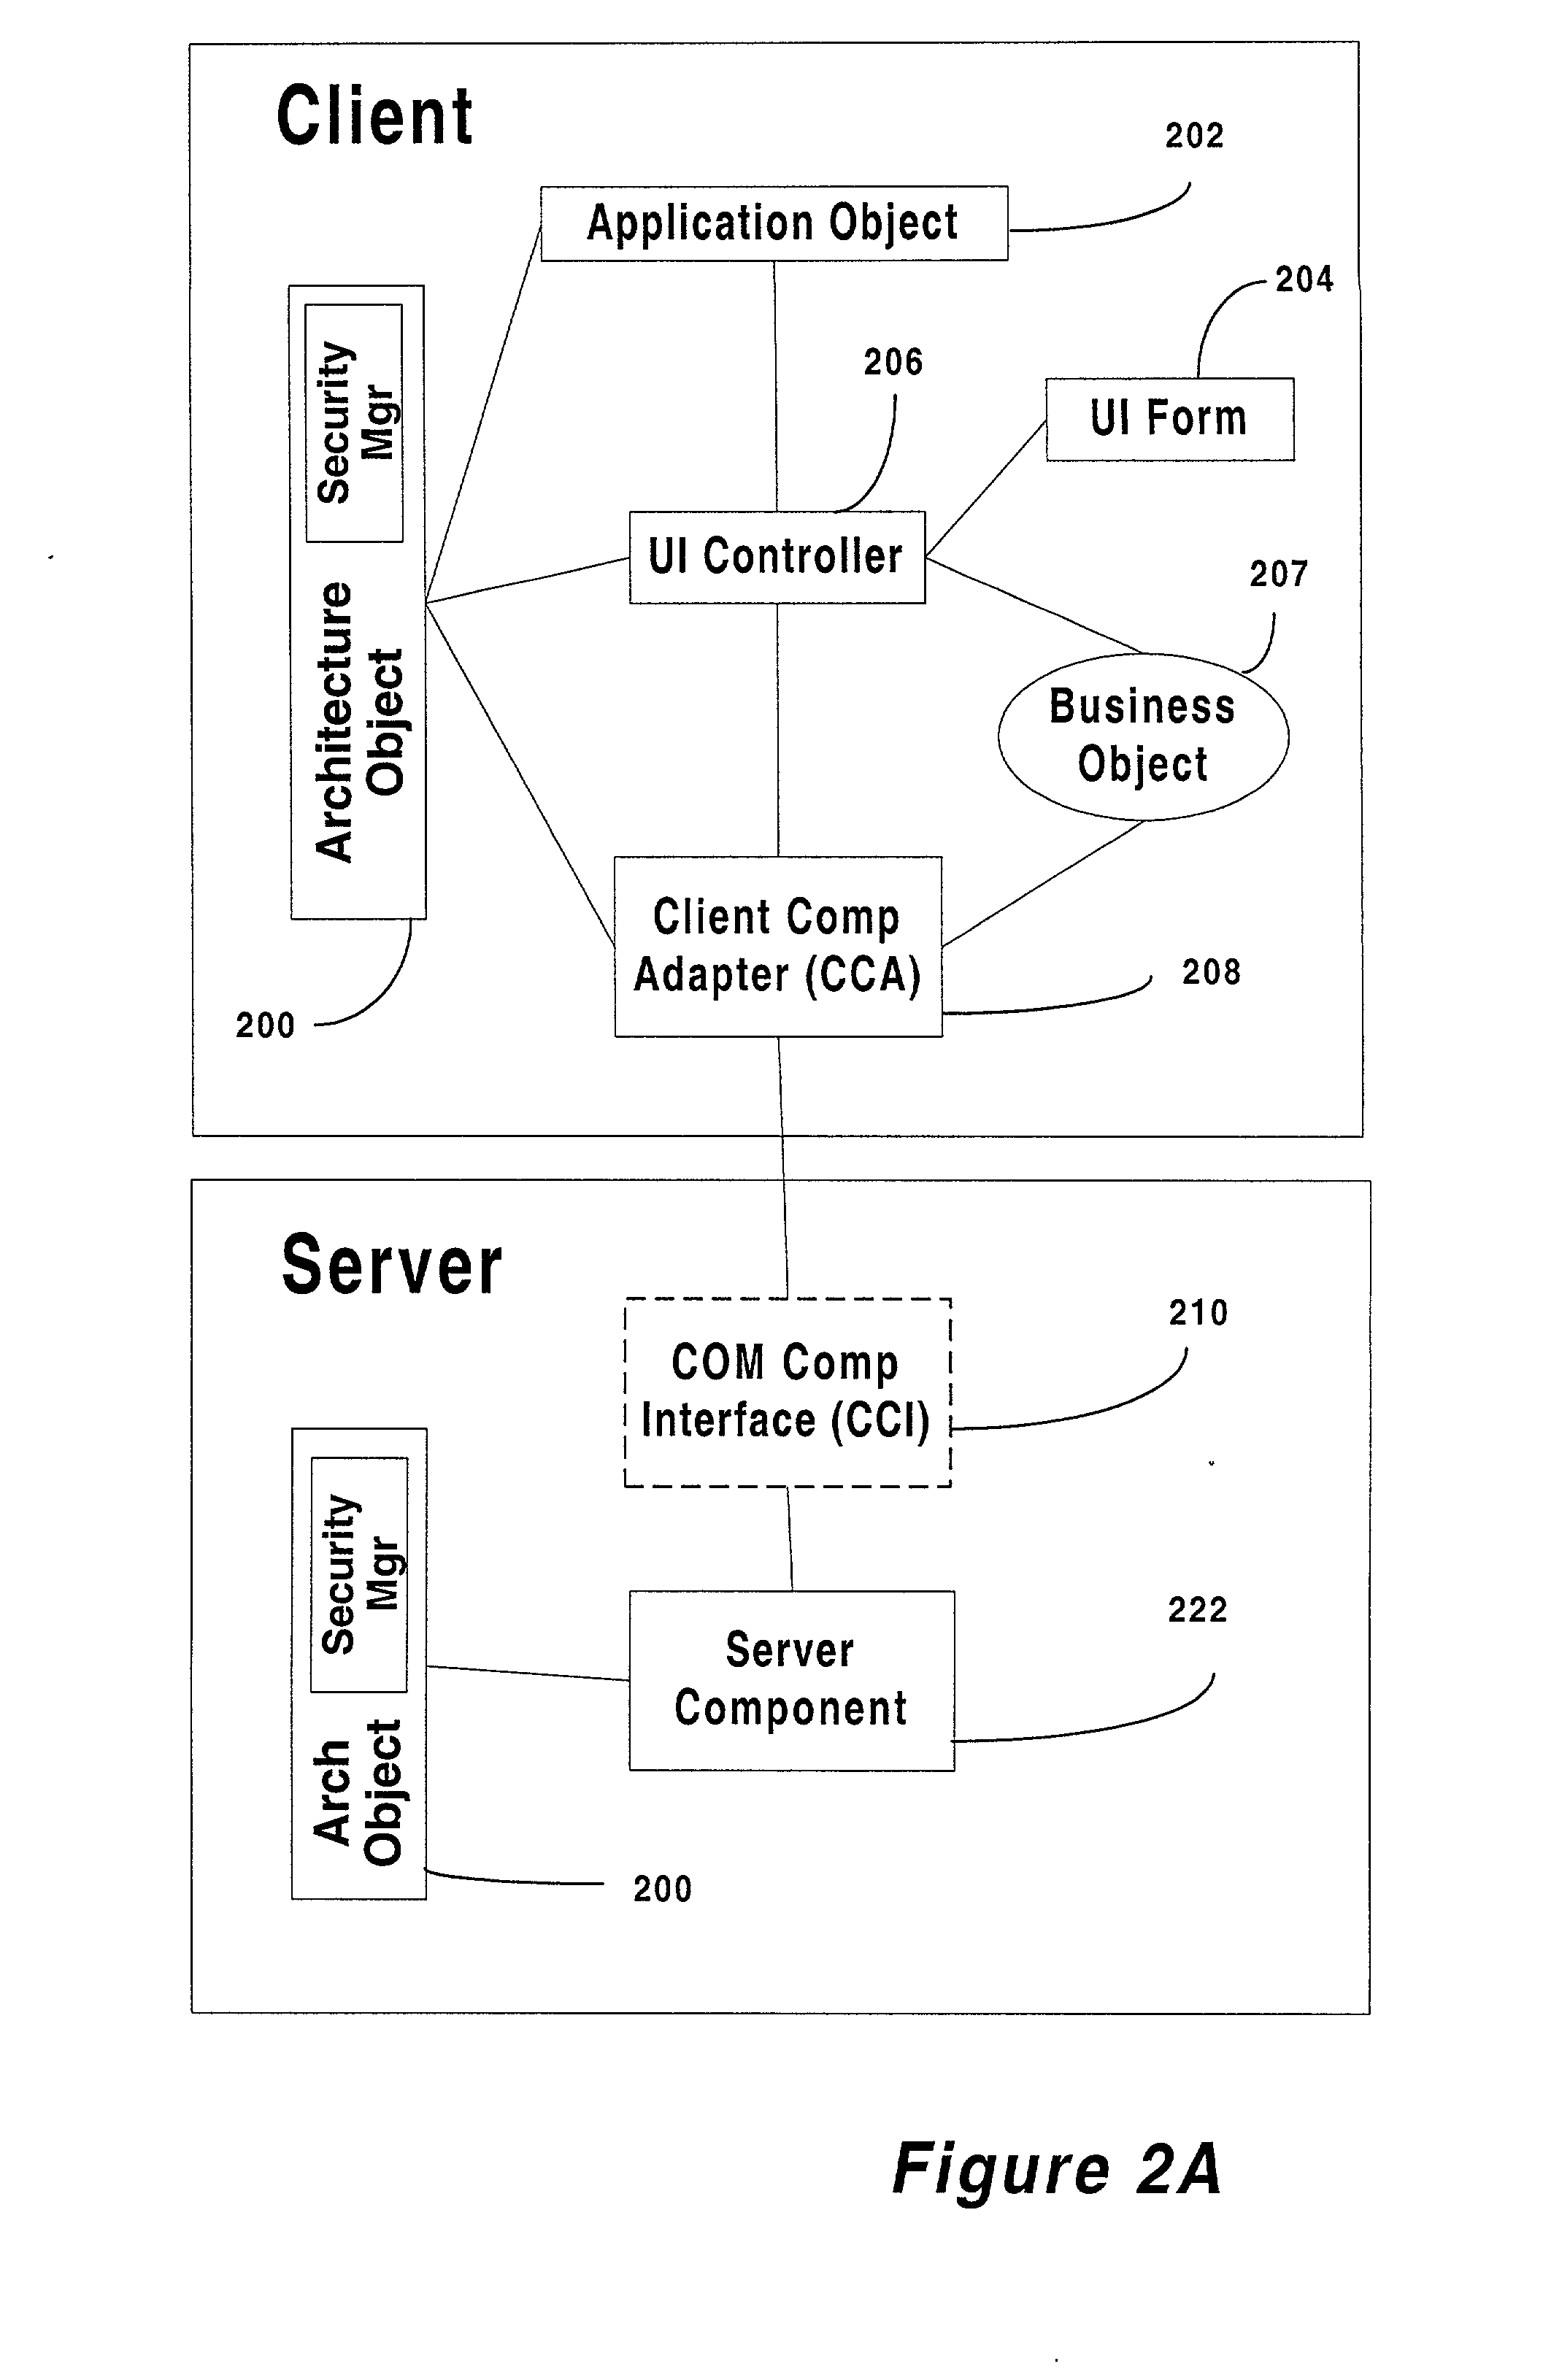 Method and article of manufacturing for component based information linking during claim processing